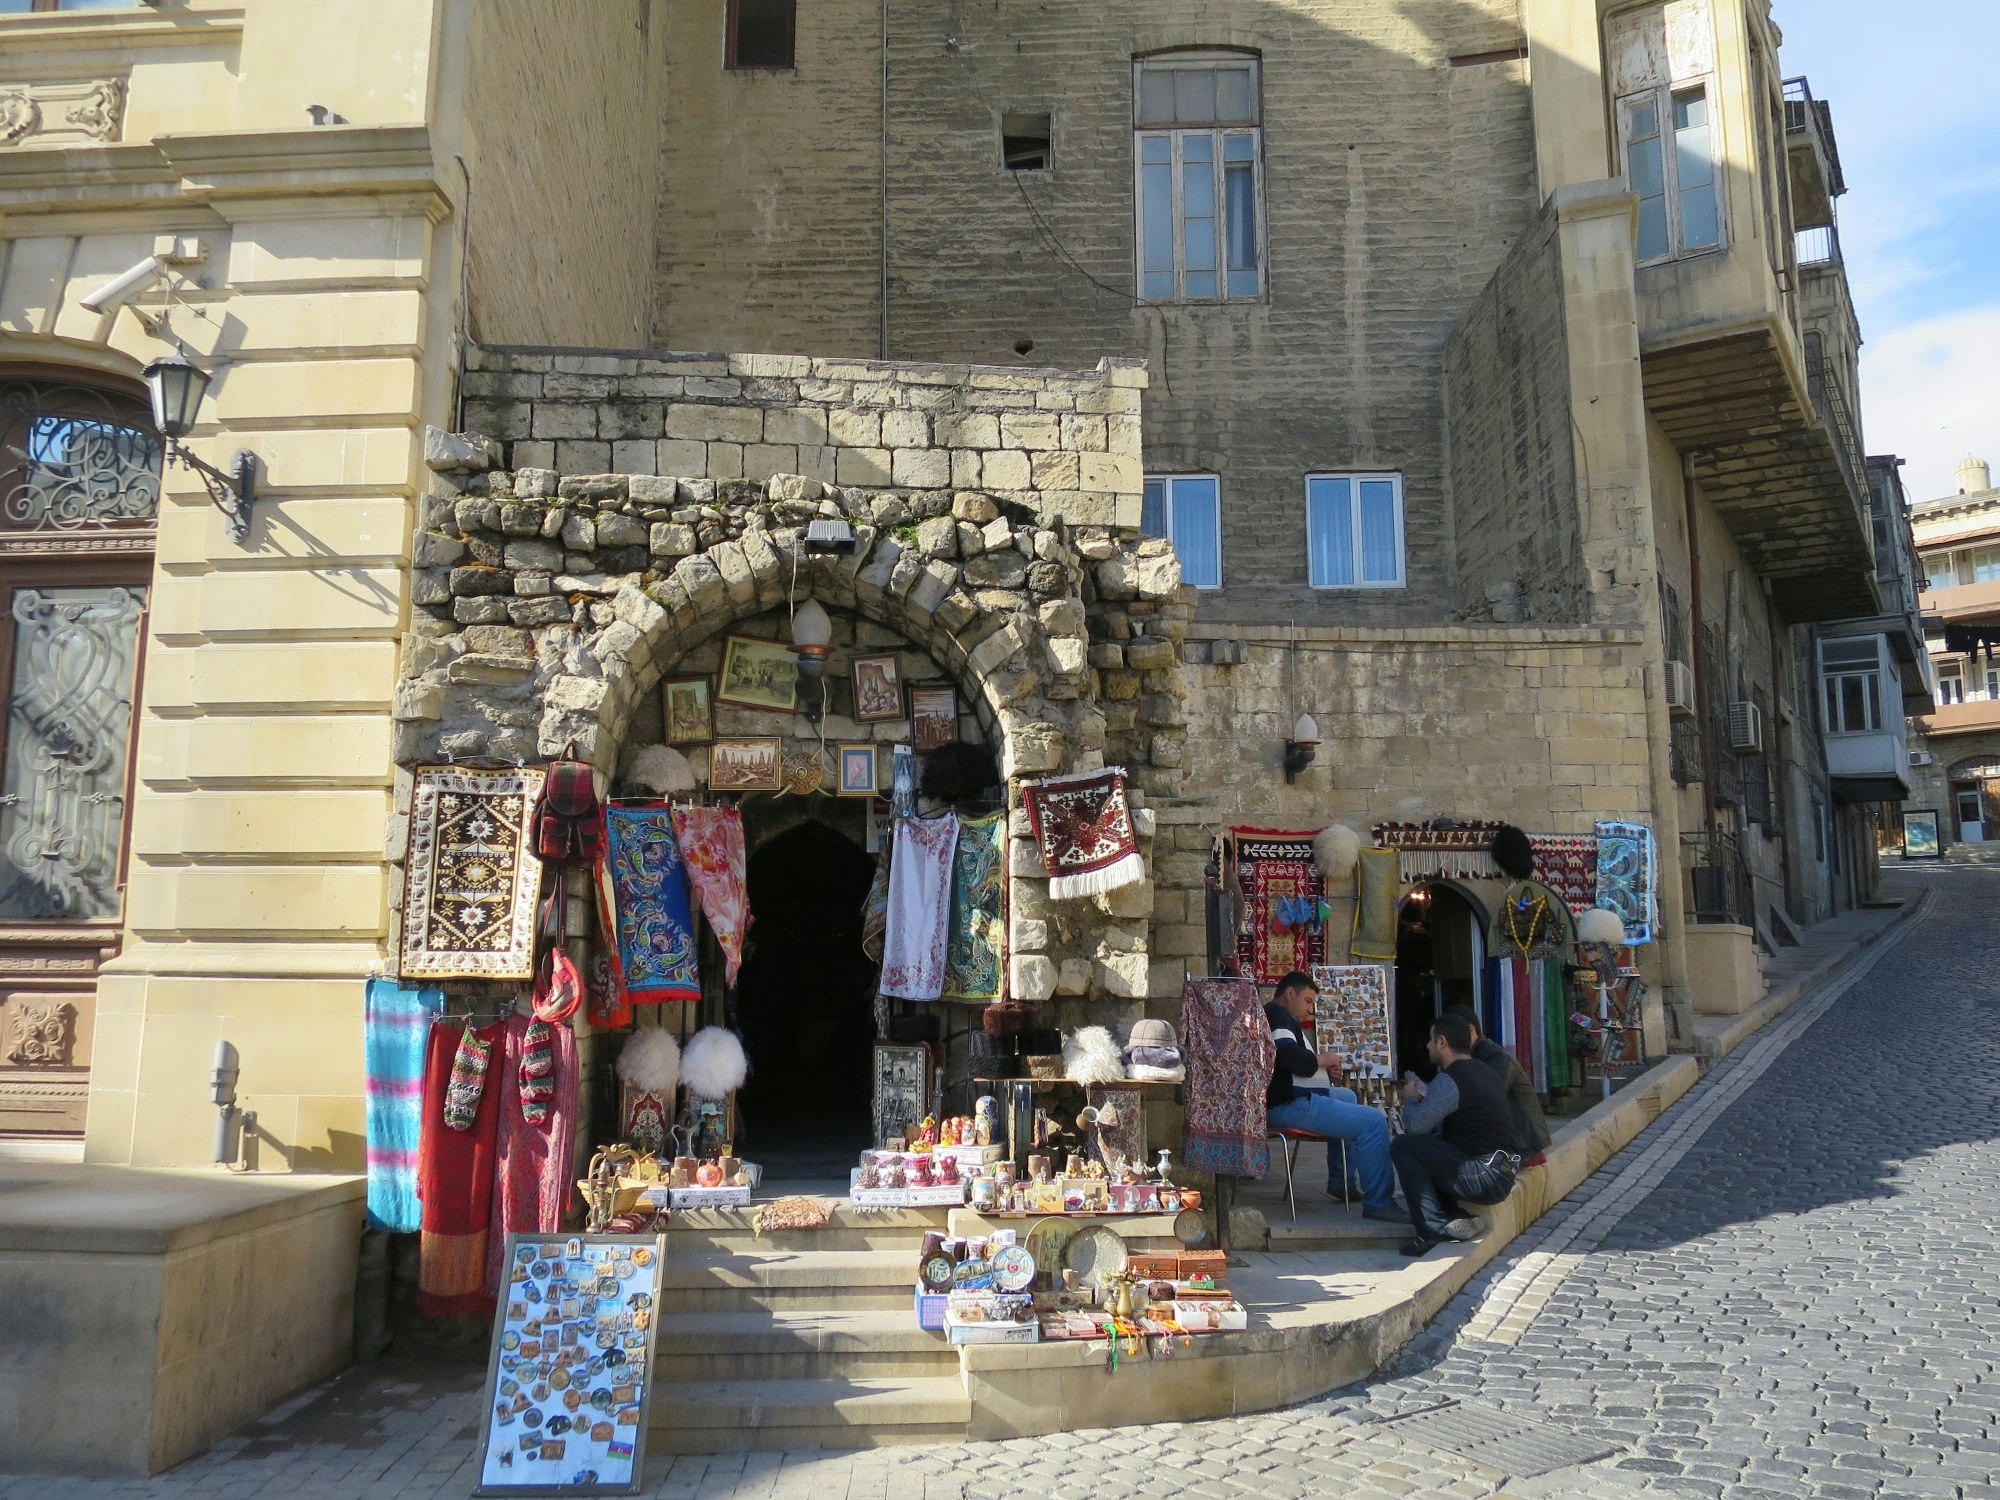 Old town, Baku. Image by Sarah Reid / Lonely Planet